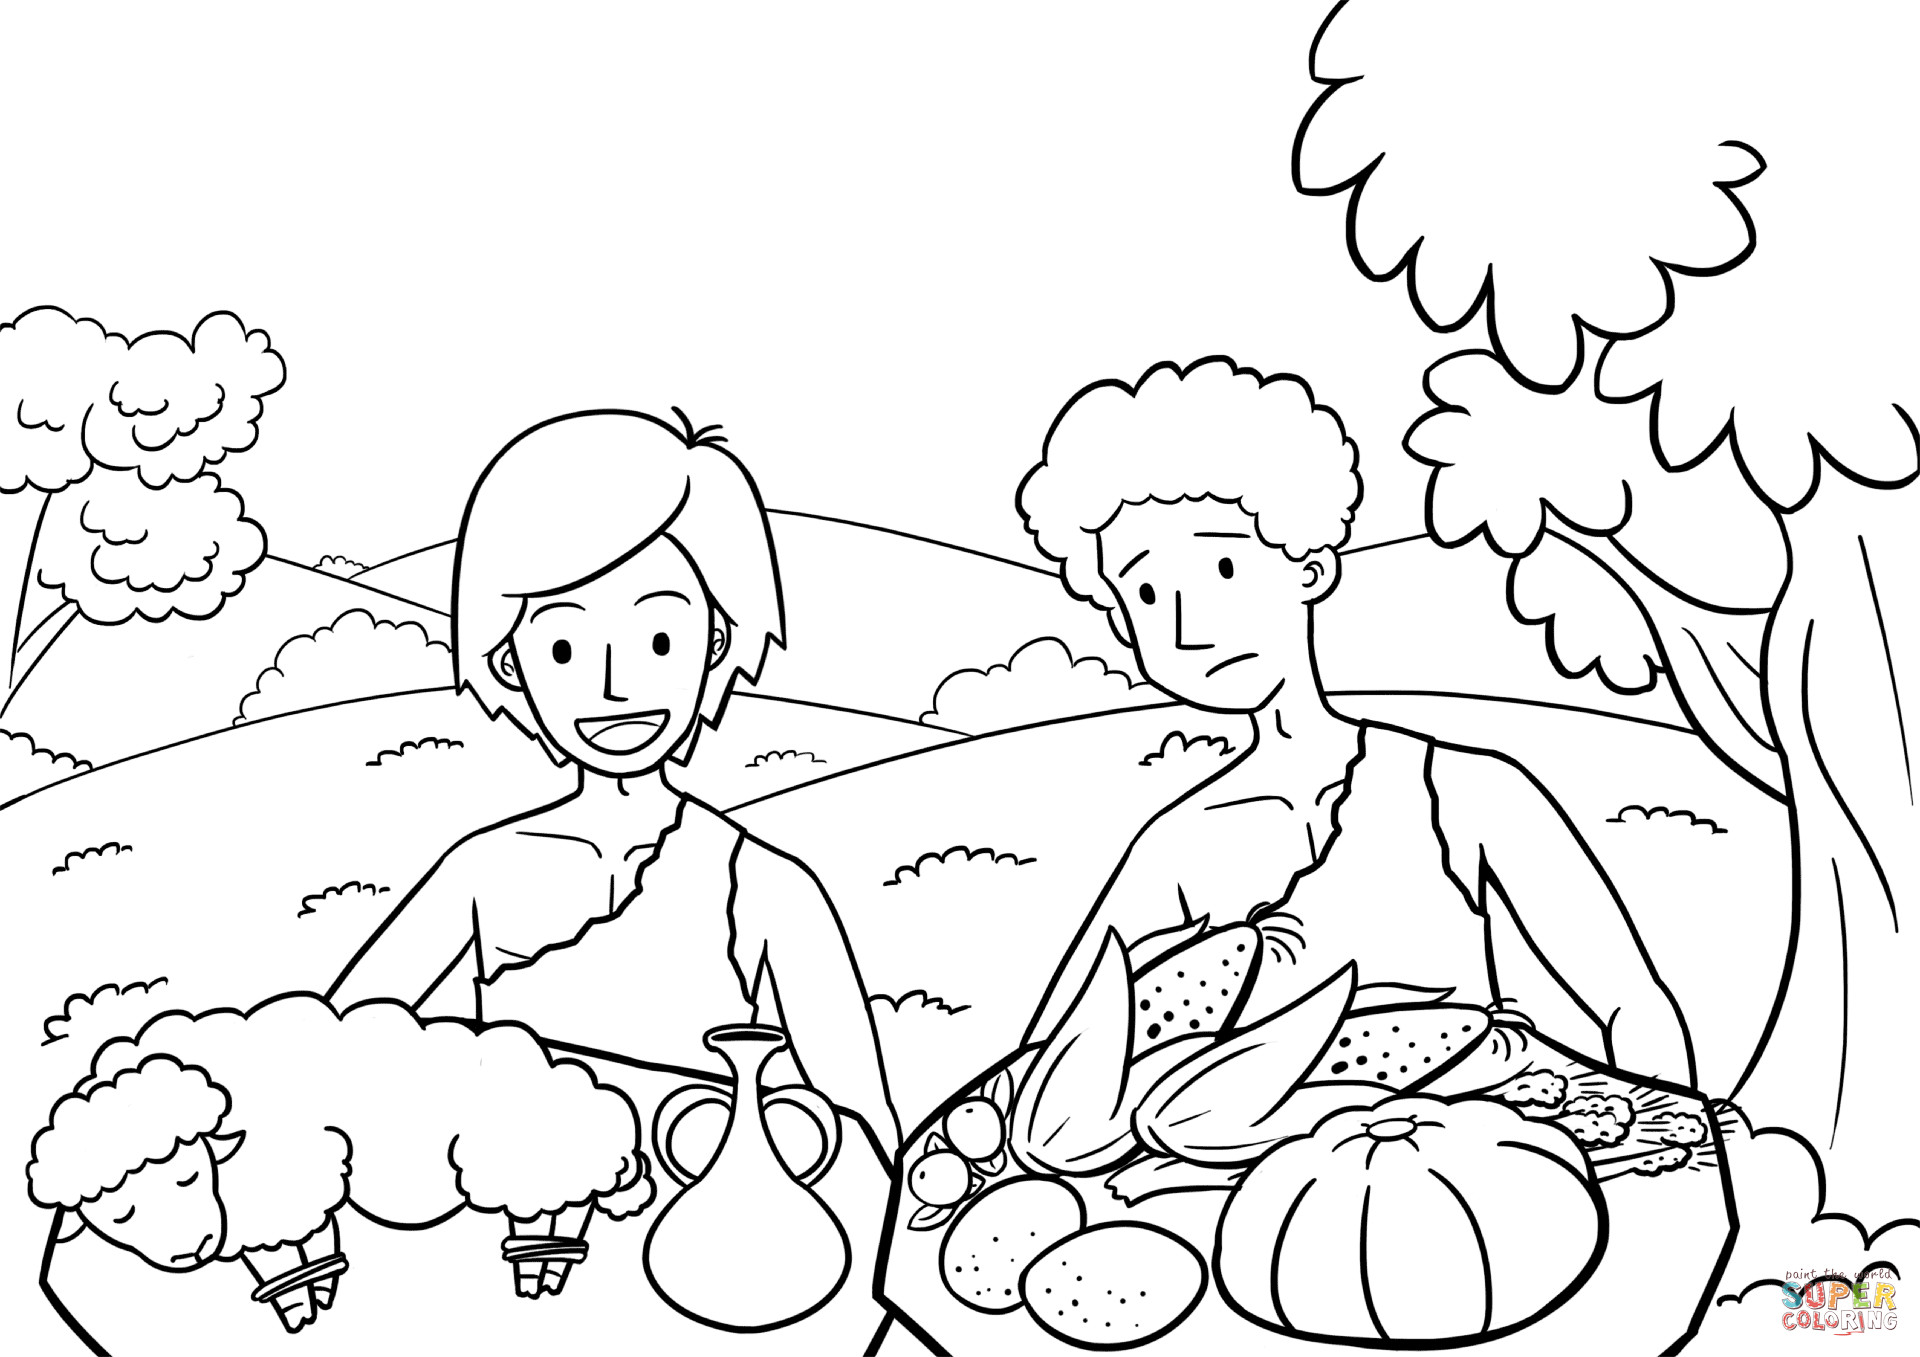 Cain And Abel Coloring Pages
 Cain and Abel the Way of Sacrifice coloring page